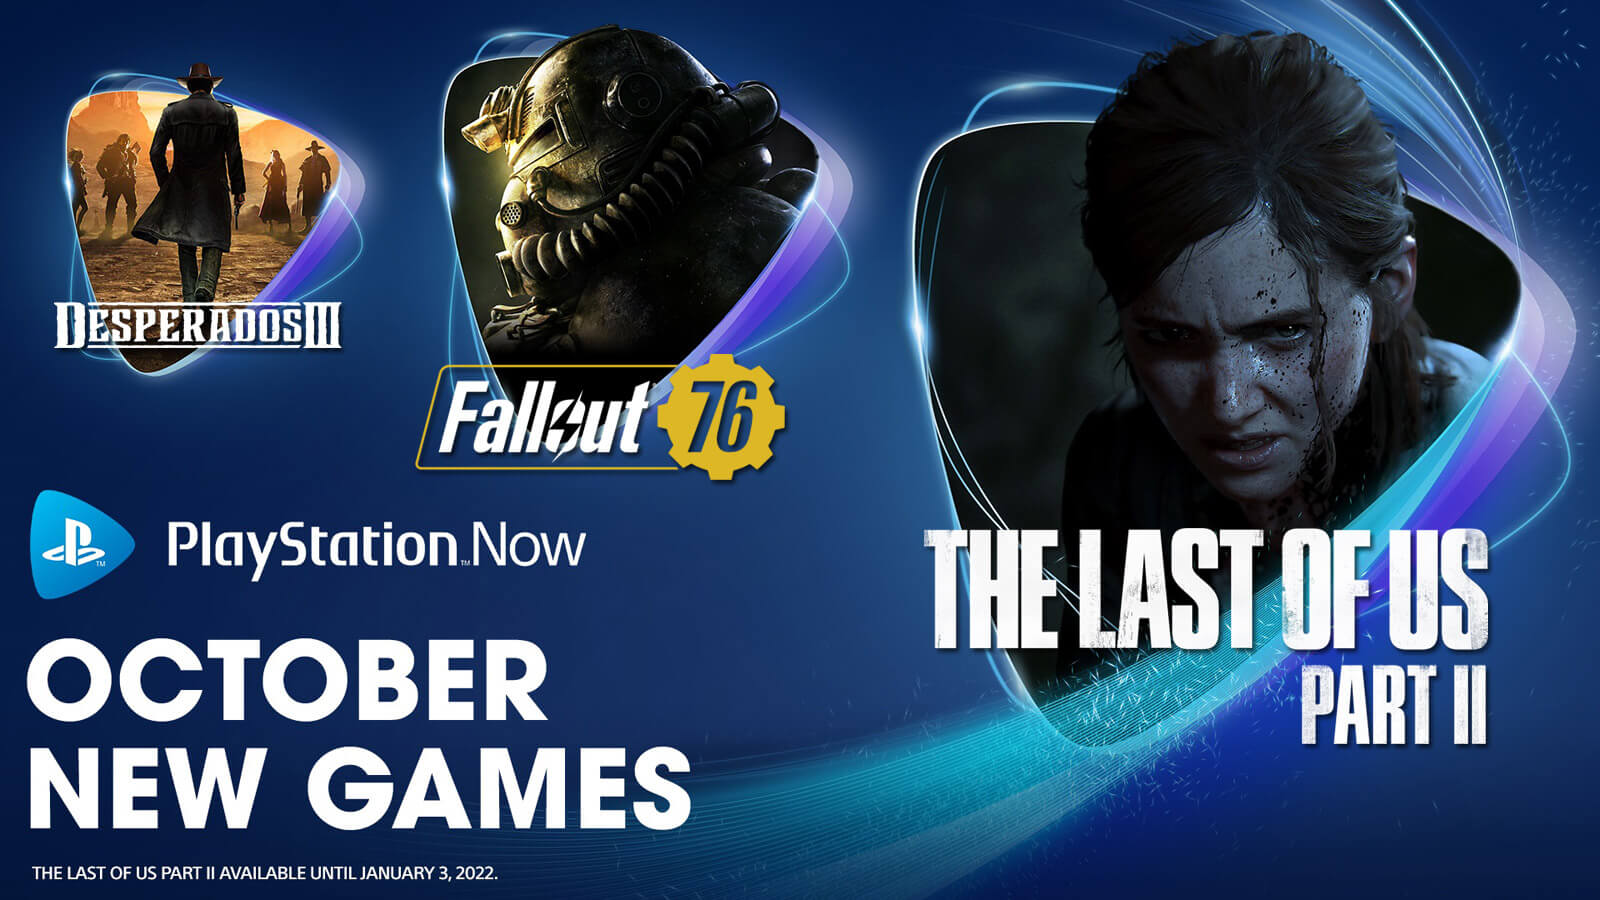 PlayStation Now Adds The Last of Us Part II, Fallout 76, and More